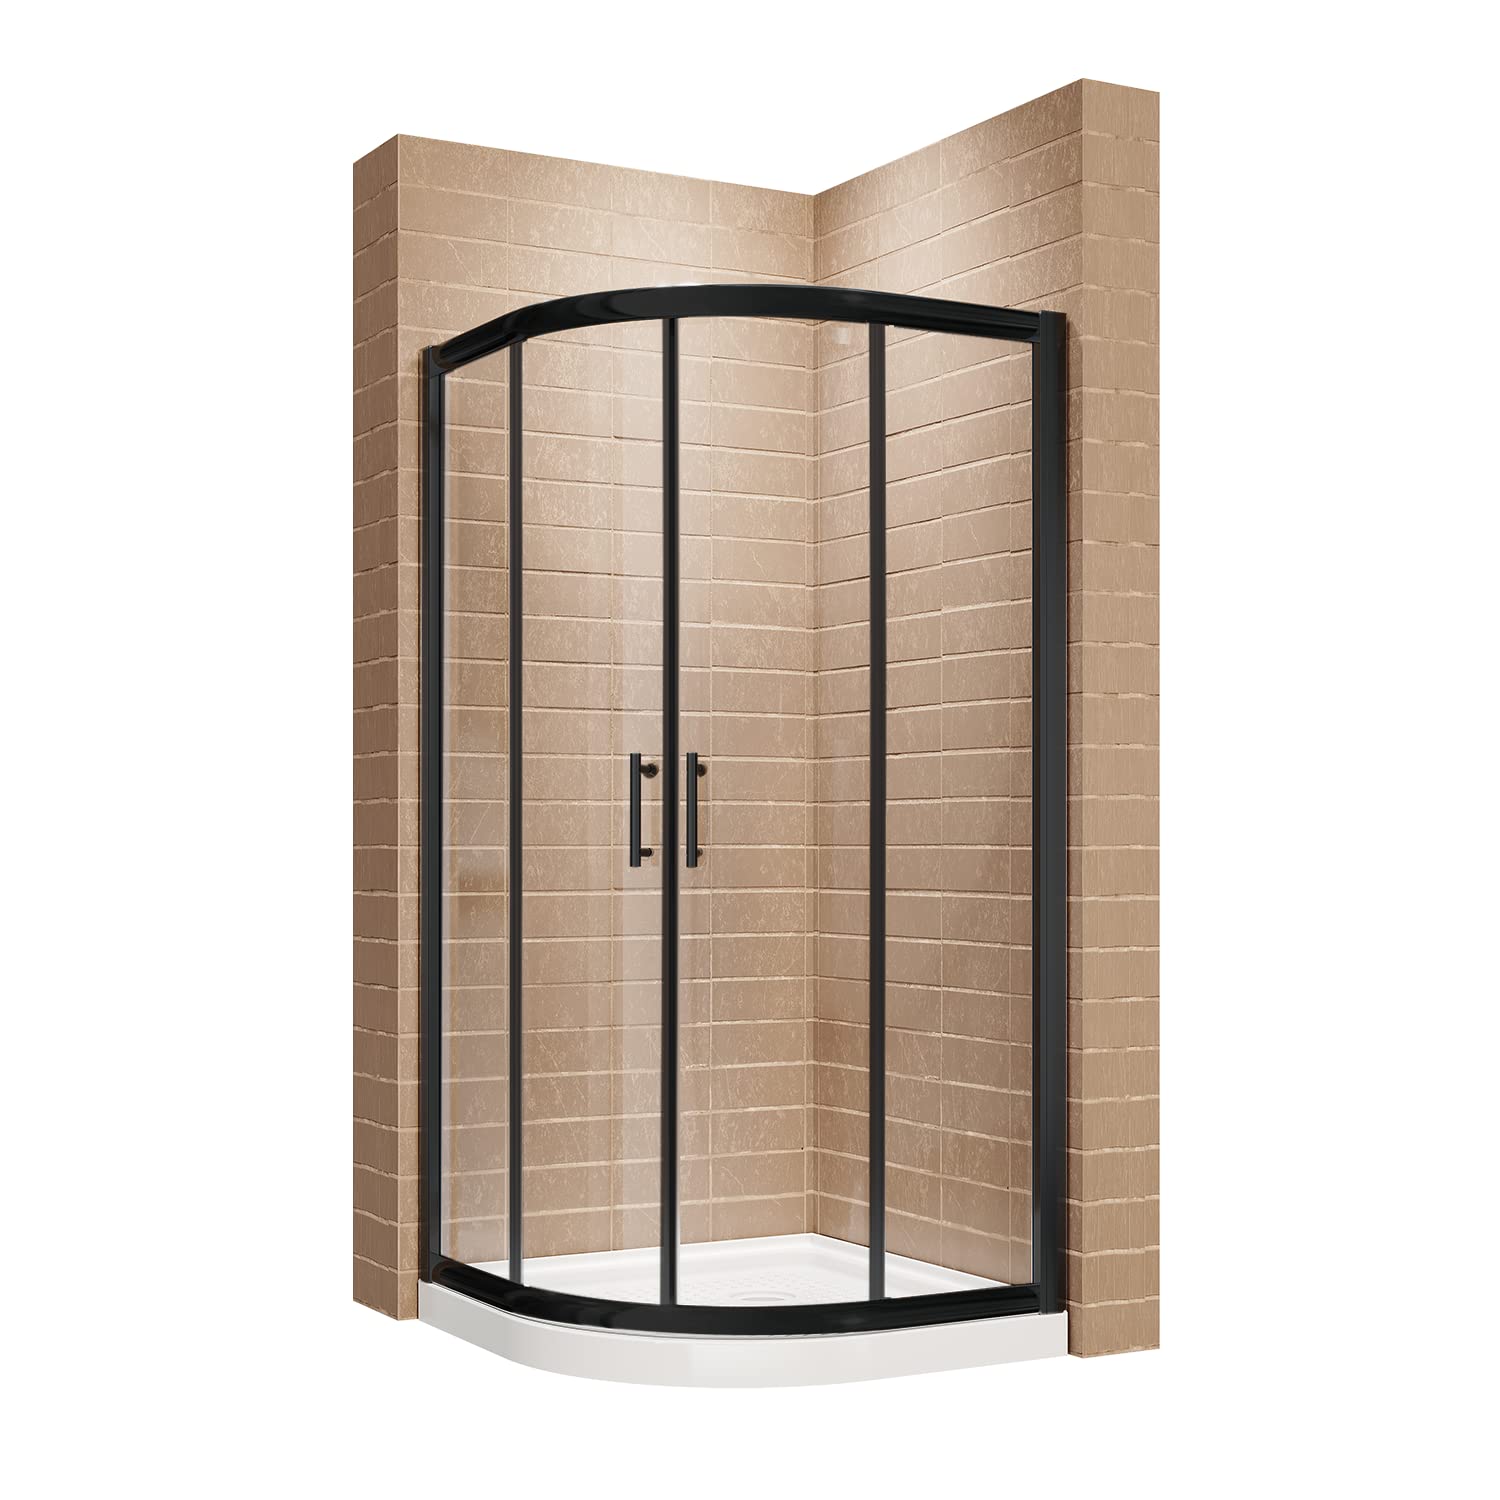 SUNNY SHOWER 38 in. D x 38 in. W x 72 in. H Black Finish Quadrant Enclosures With Sliding Doors - SUNNY SHOWER